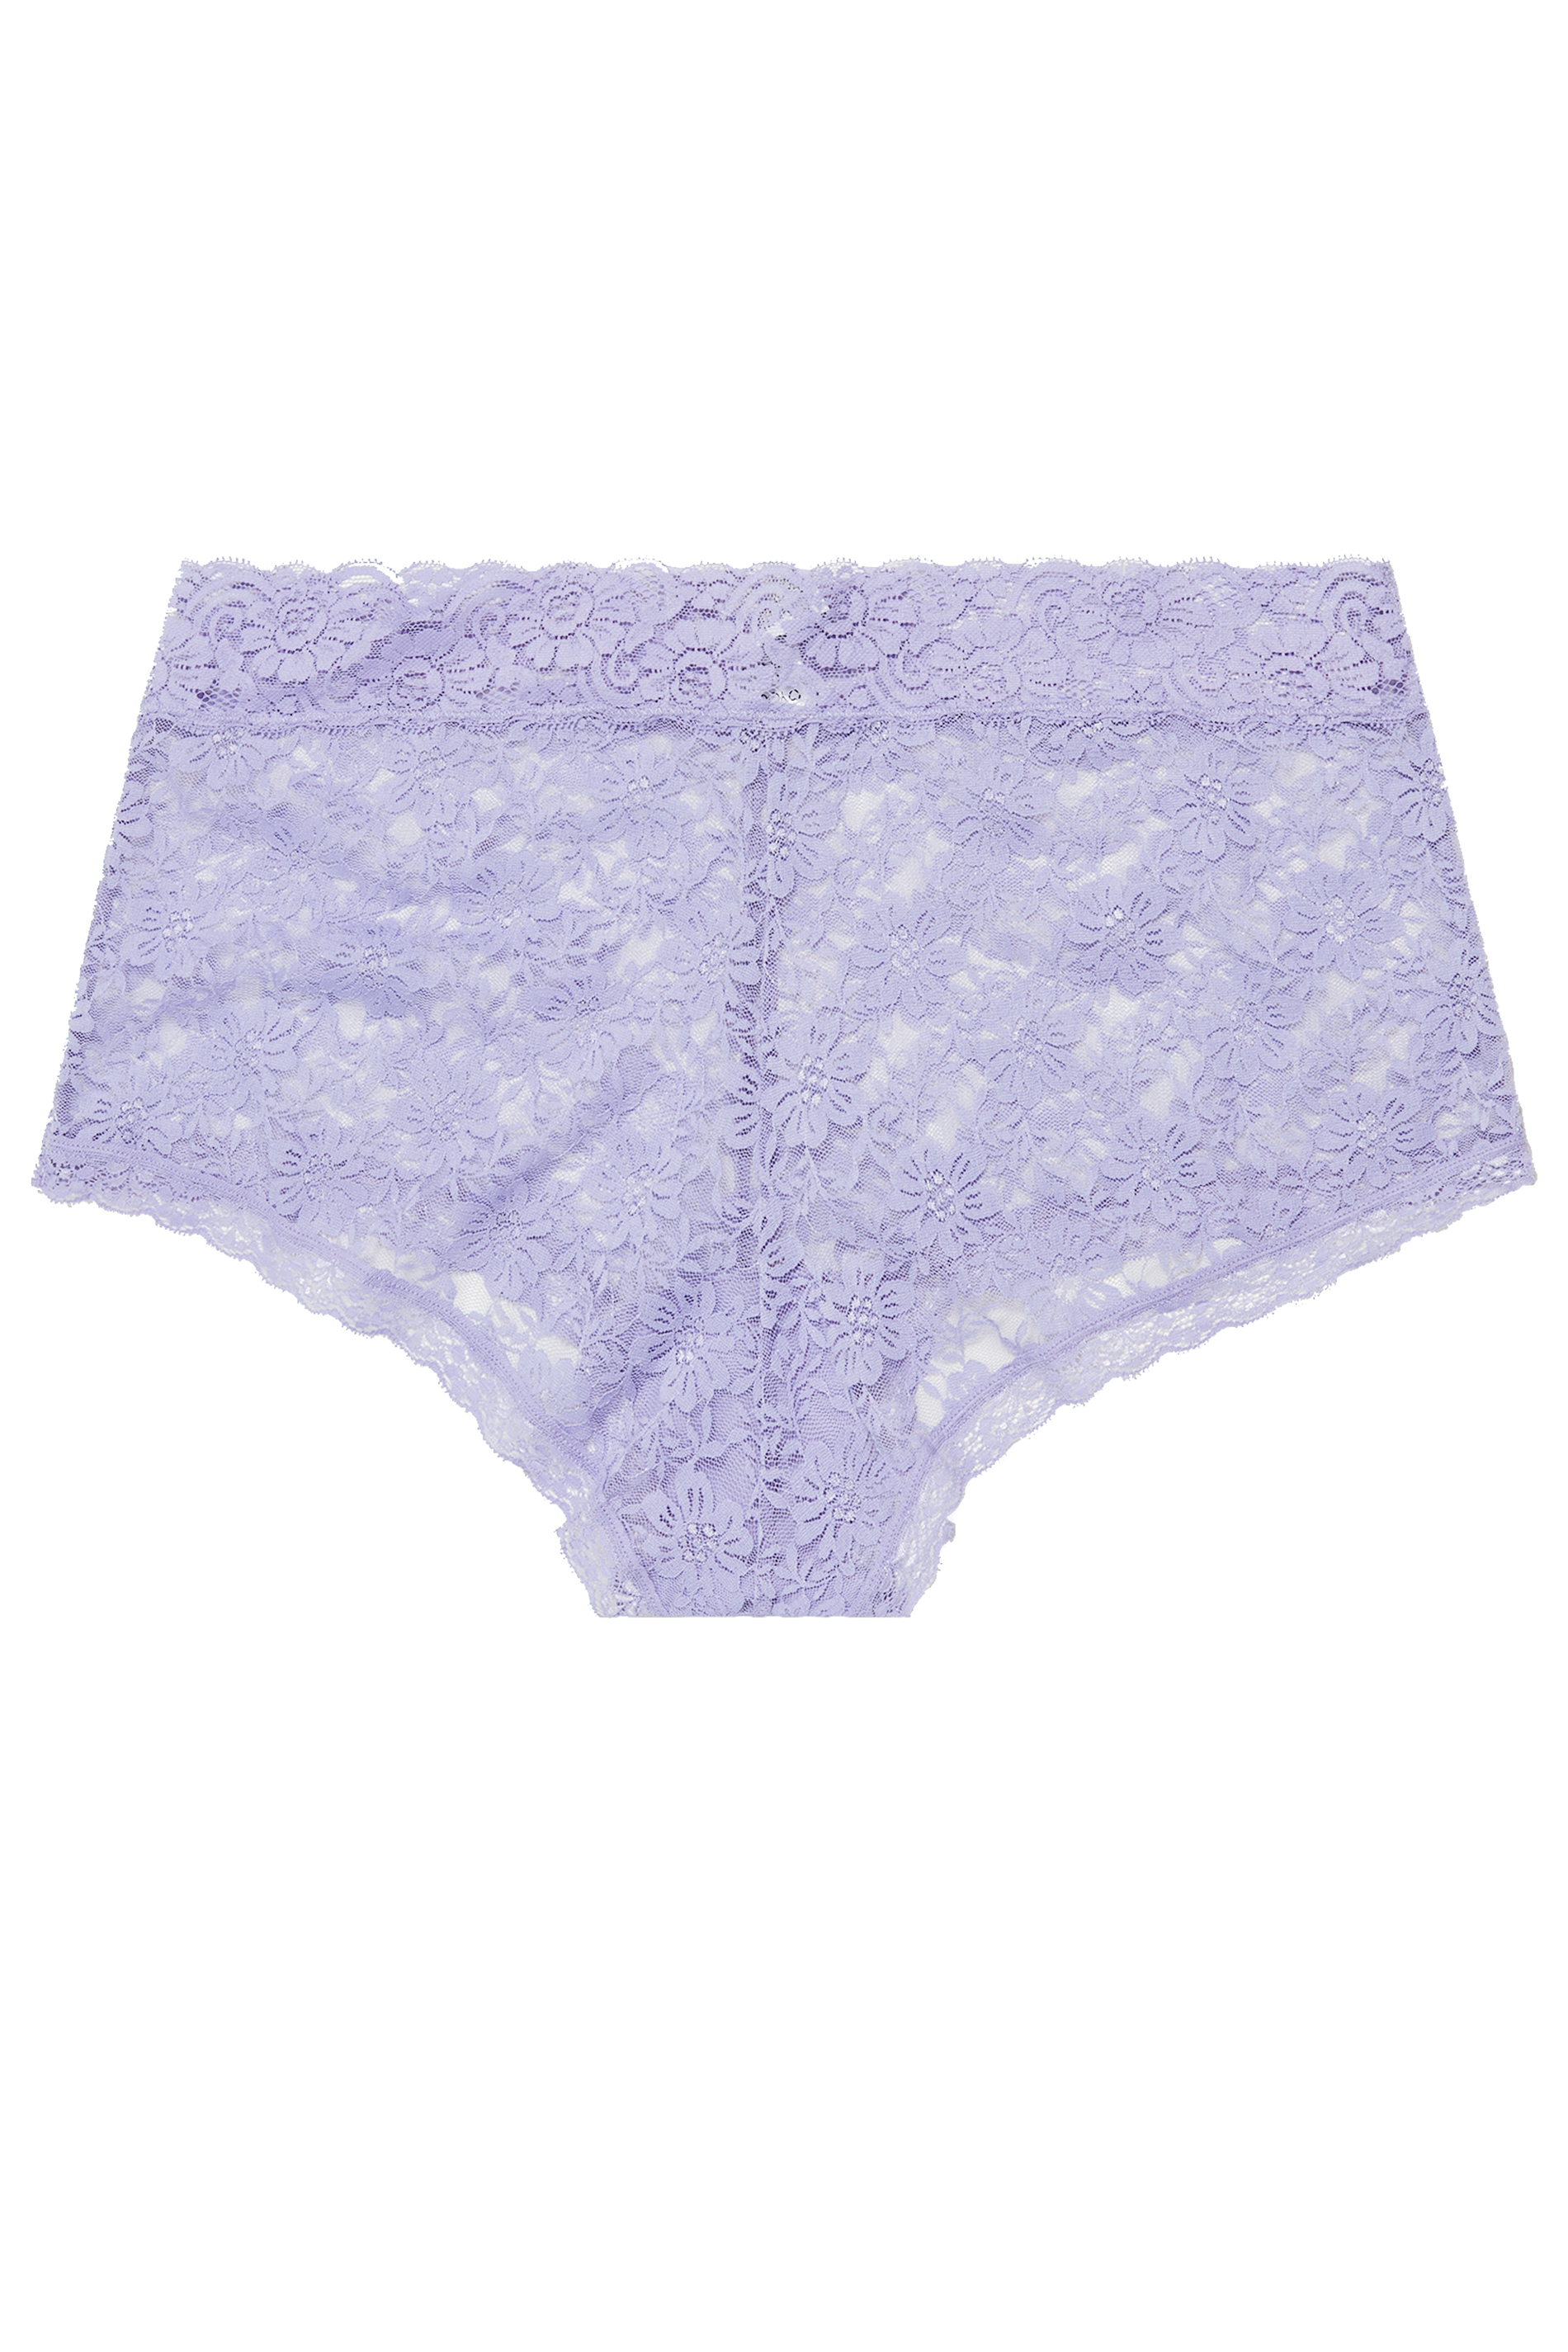 YOURS Curve Purple Floral Lace Shorts | Yours Clothing  3